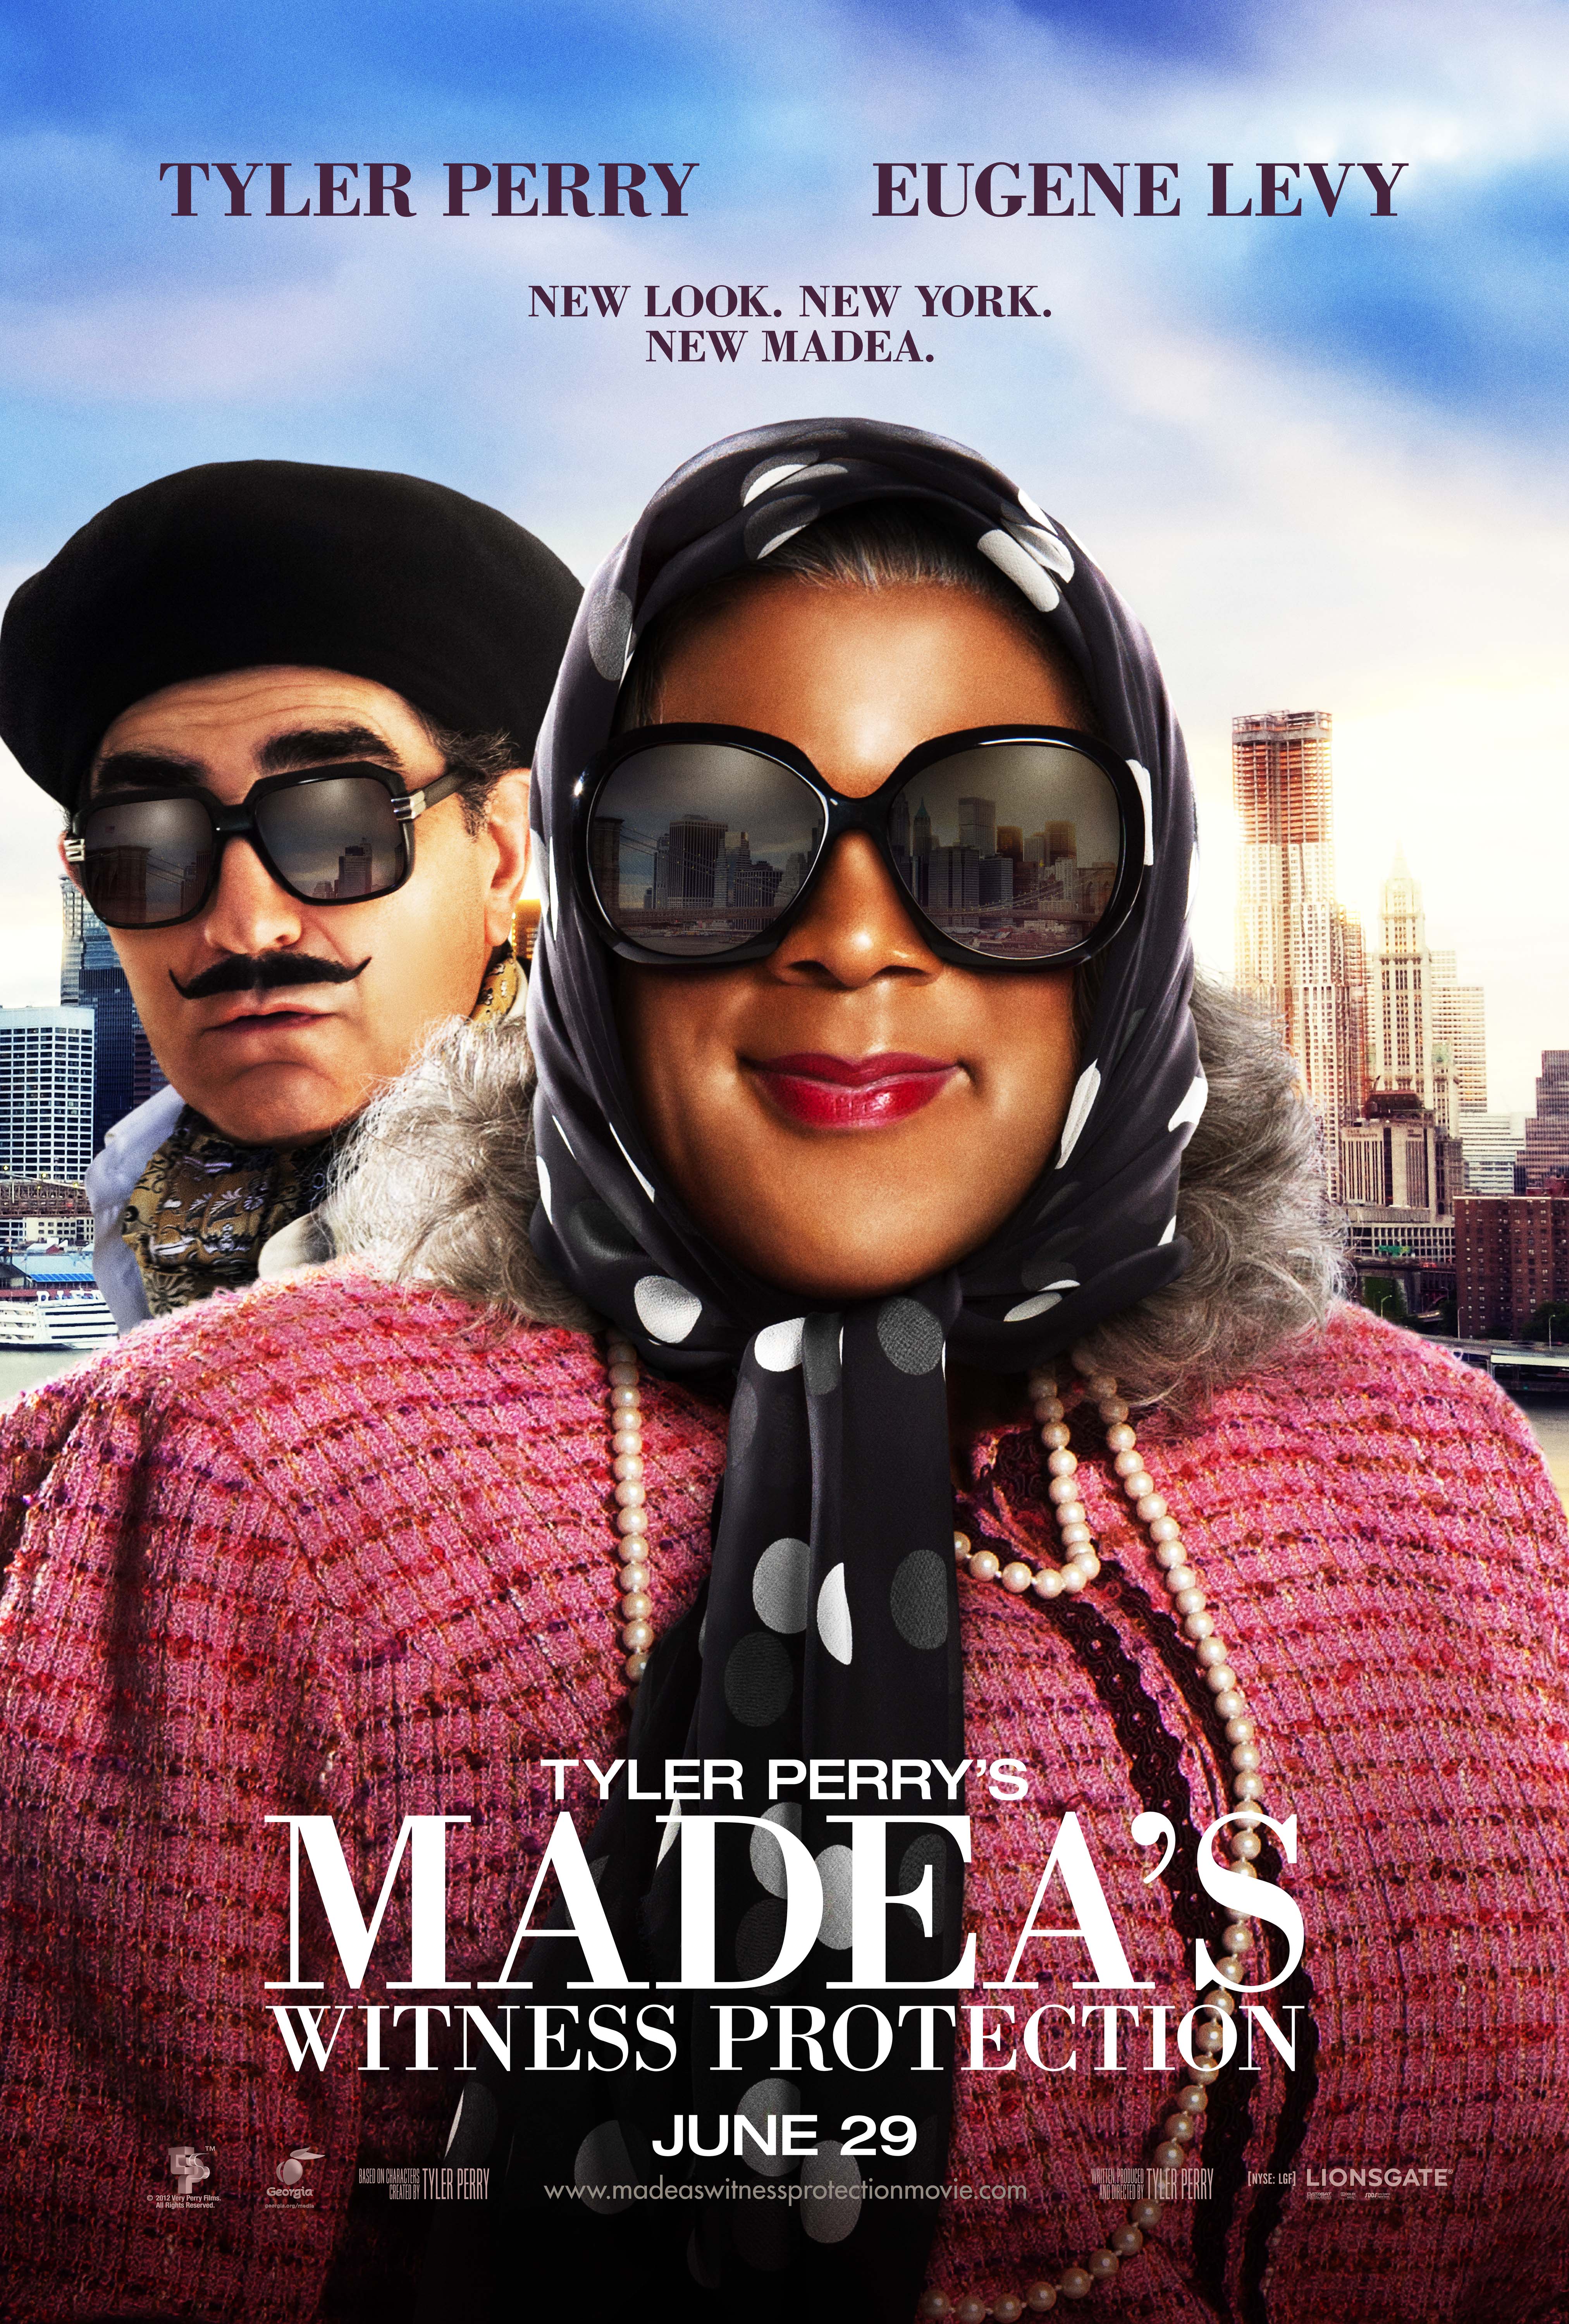 TYLER PERRY - MADEA'S WITNESS PROTECTION